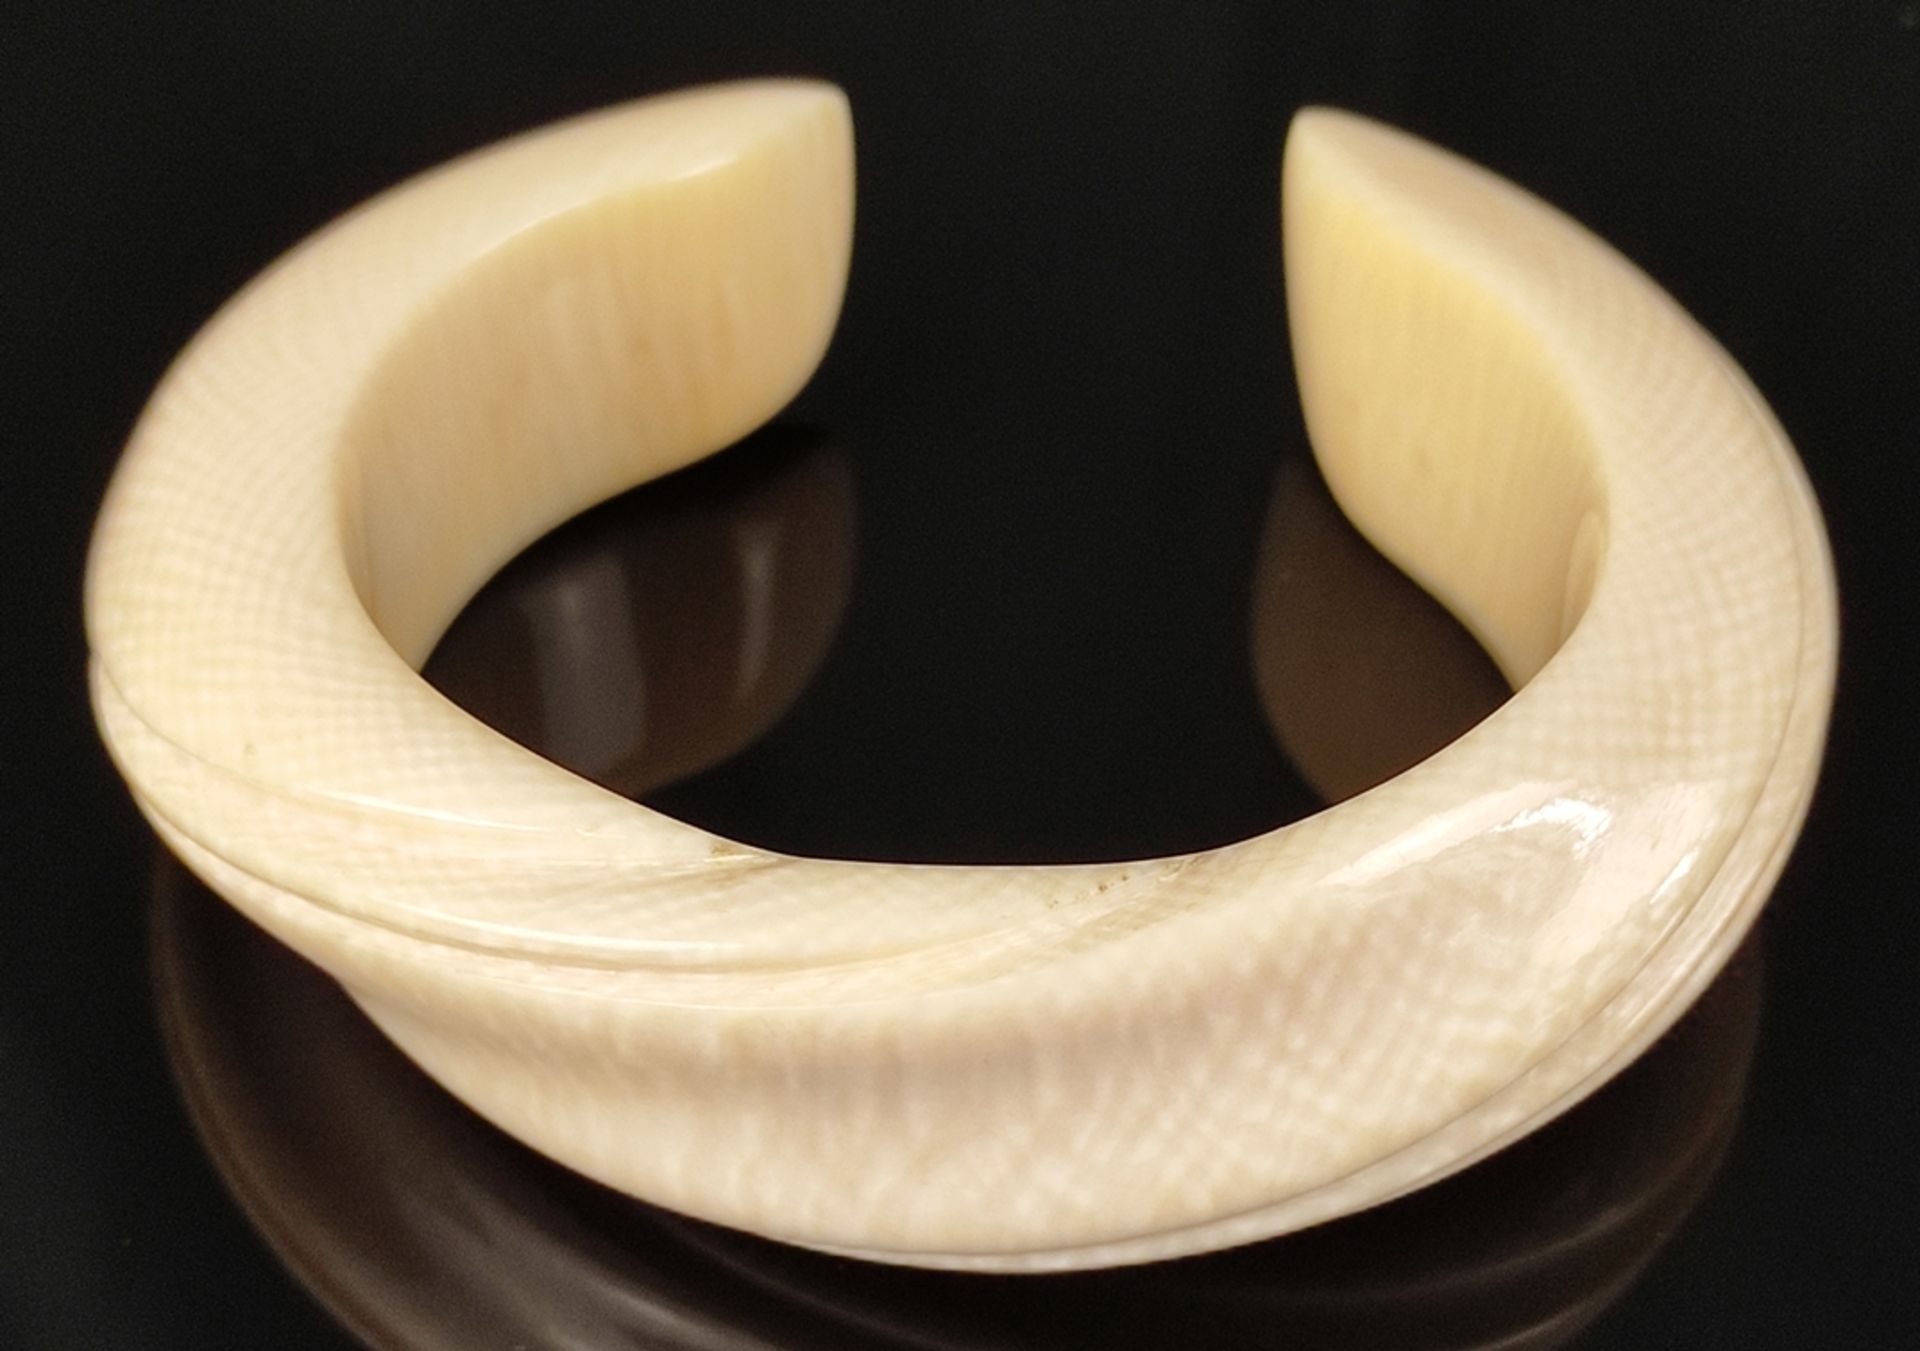 Bangle, oval, ivory, 1950s, width approx. 2cm, diameter at largest point 5.5cm, for narrow wrist - Image 2 of 3